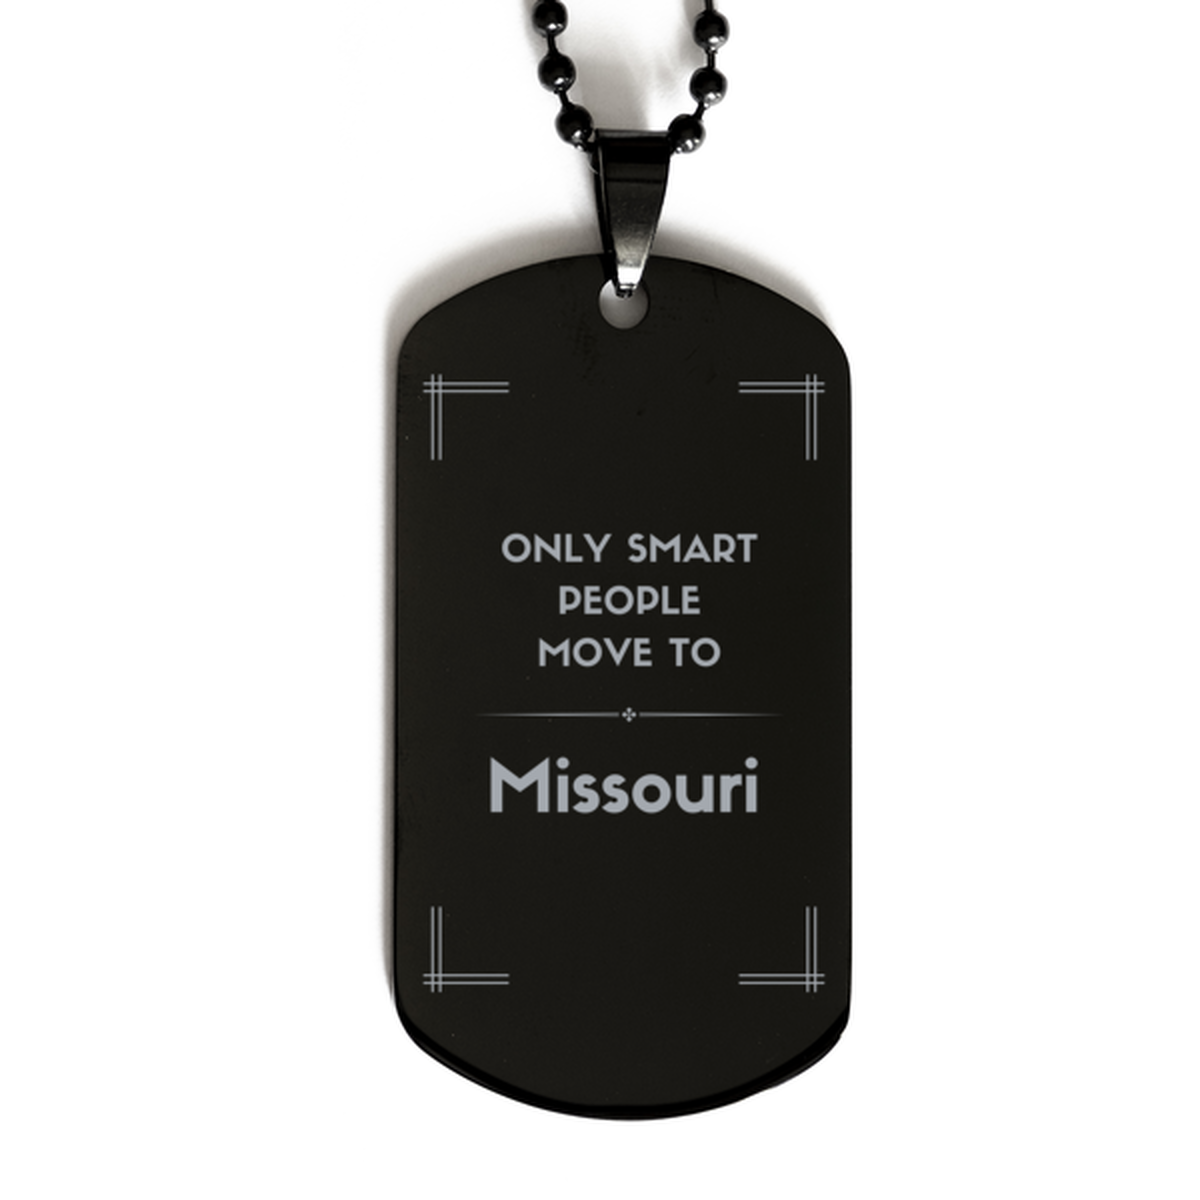 Only smart people move to Missouri Black Dog Tag, Gag Gifts For Missouri, Move to Missouri Gifts for Friends Coworker Funny Saying Quote